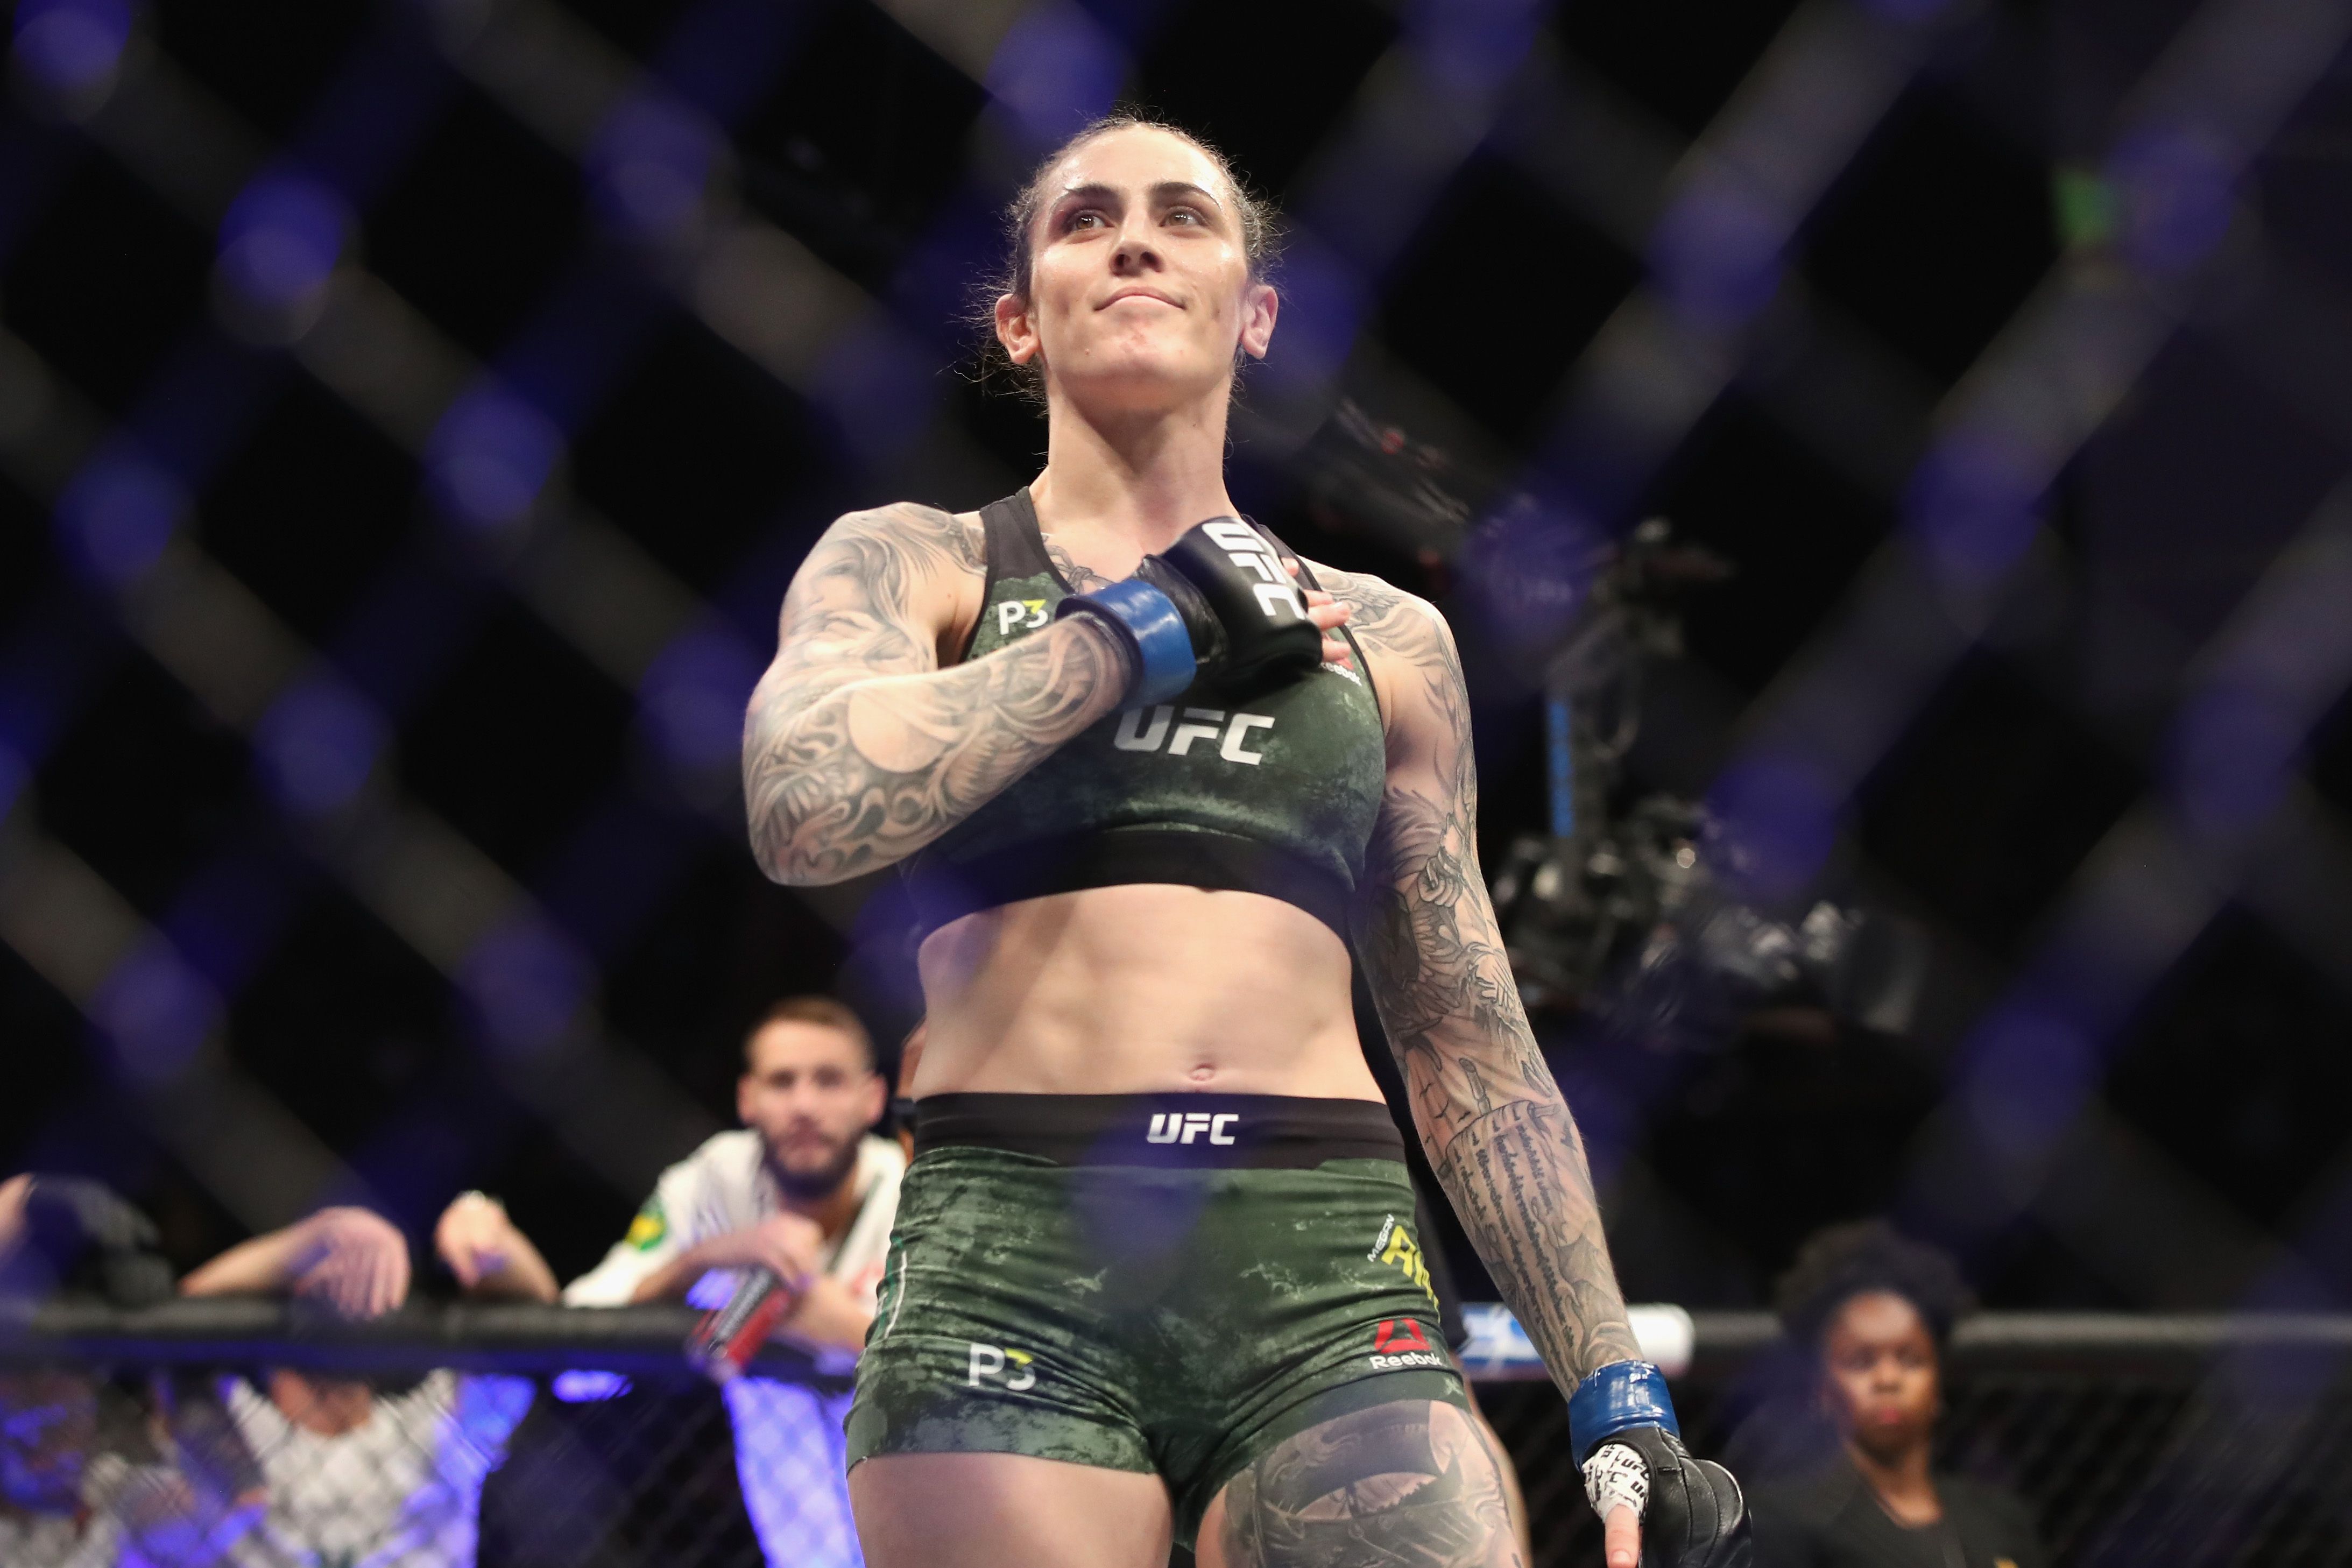 Megan Anderson is the former Invicta FC featherweight champion